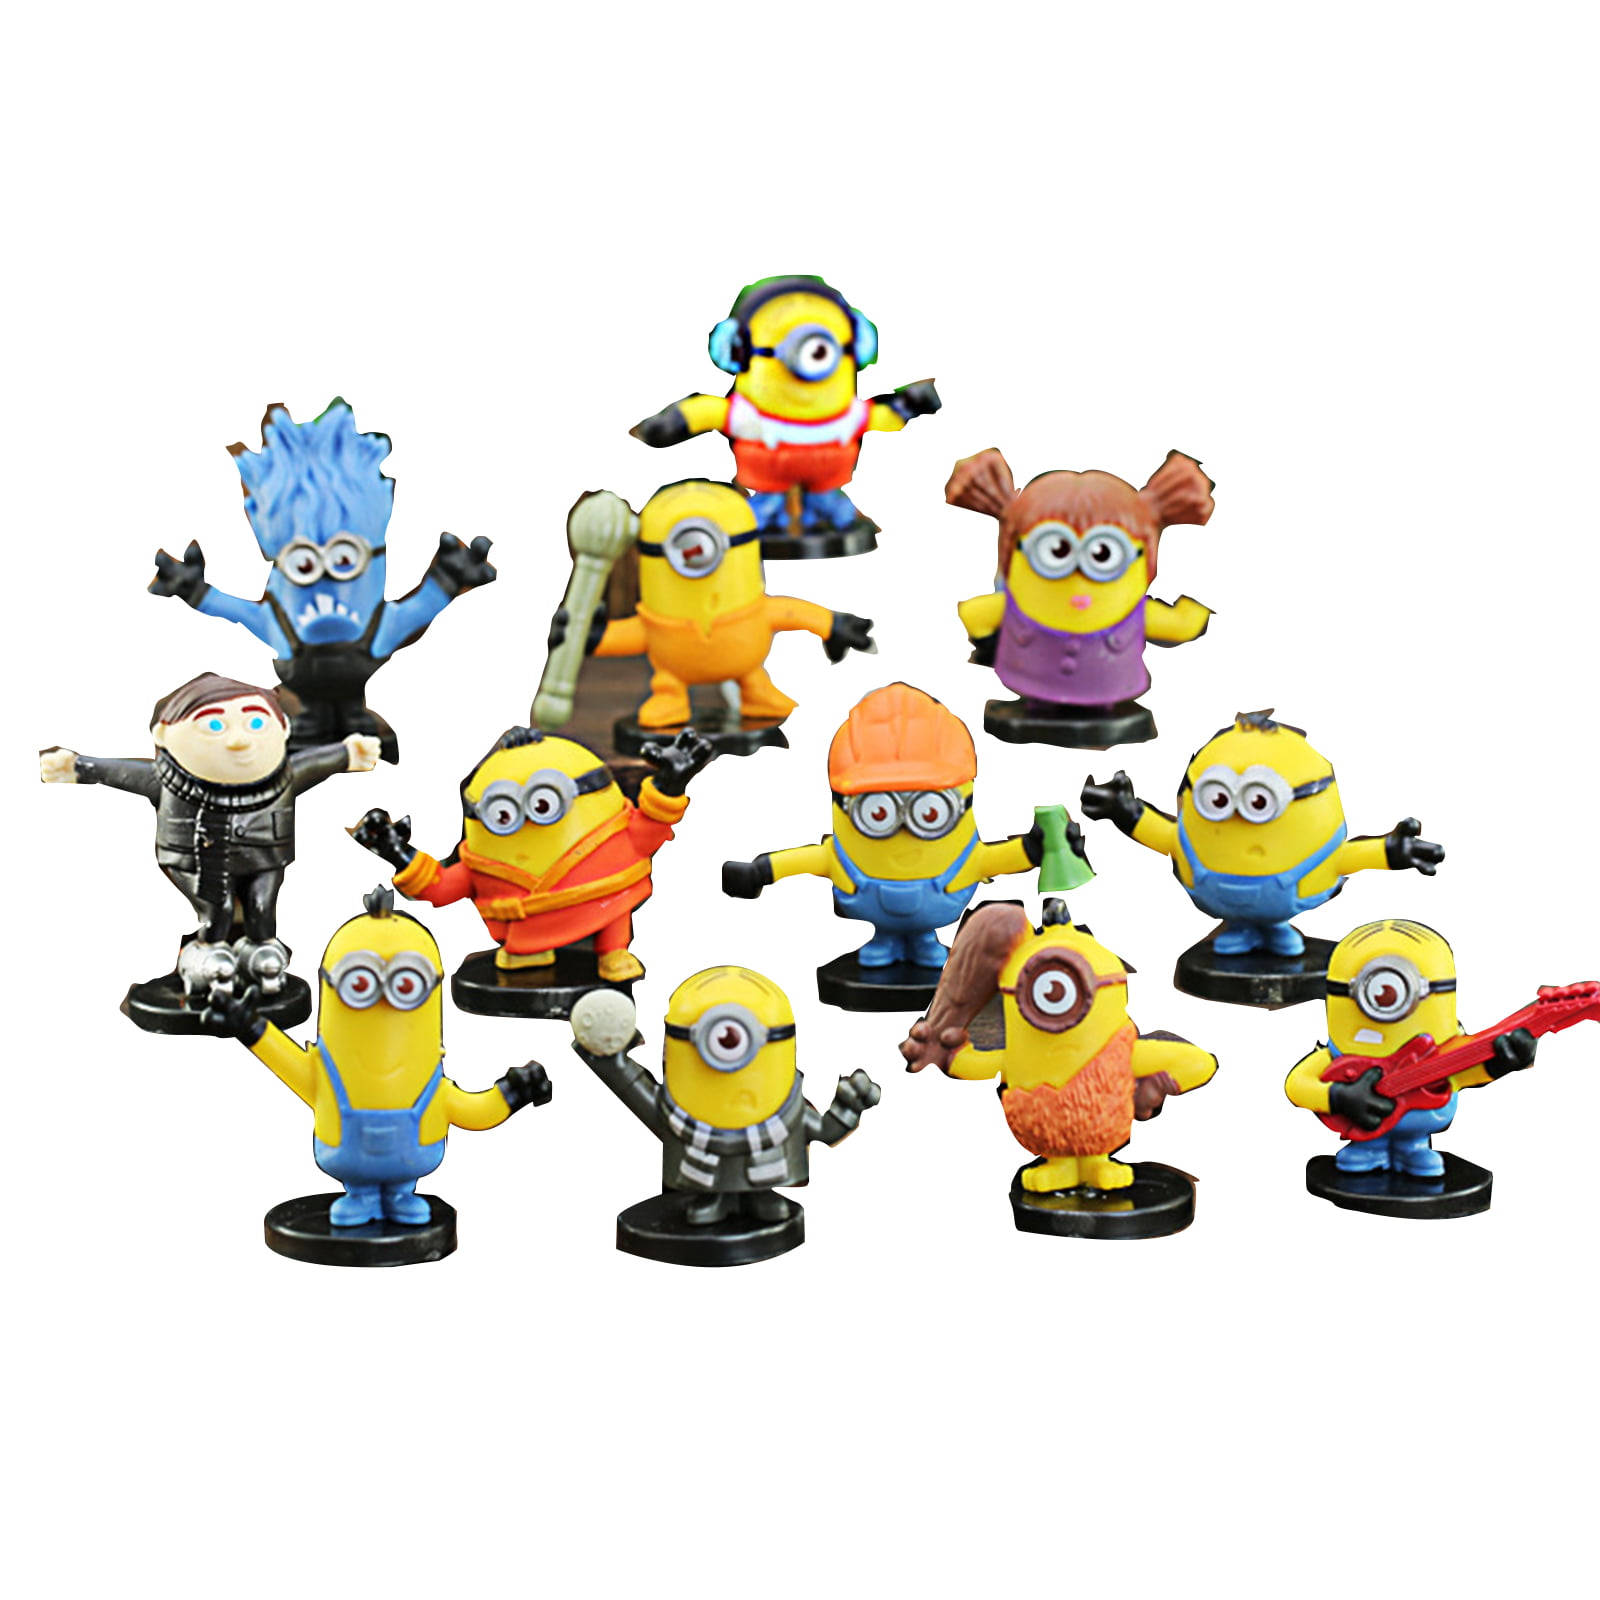 12 Sets Despicable Me 2 Minions Movie Character Figure Doll Toys Gift Cake Decor 